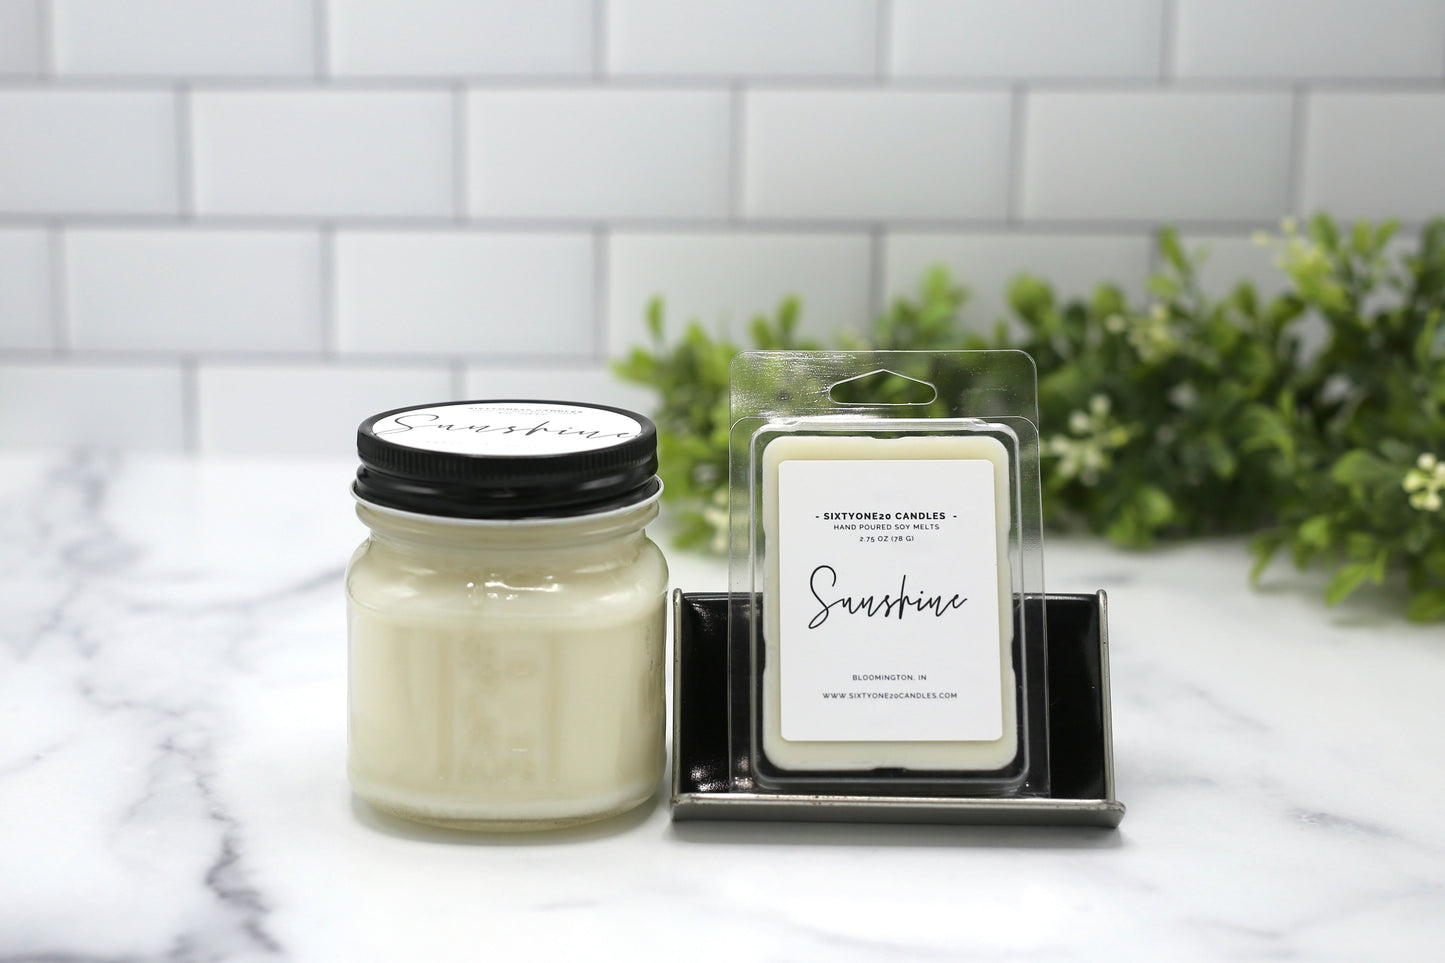 Sunshine Soy Wax Candle in Square Mason Jar and 6 cavity clamshell soy wax melt